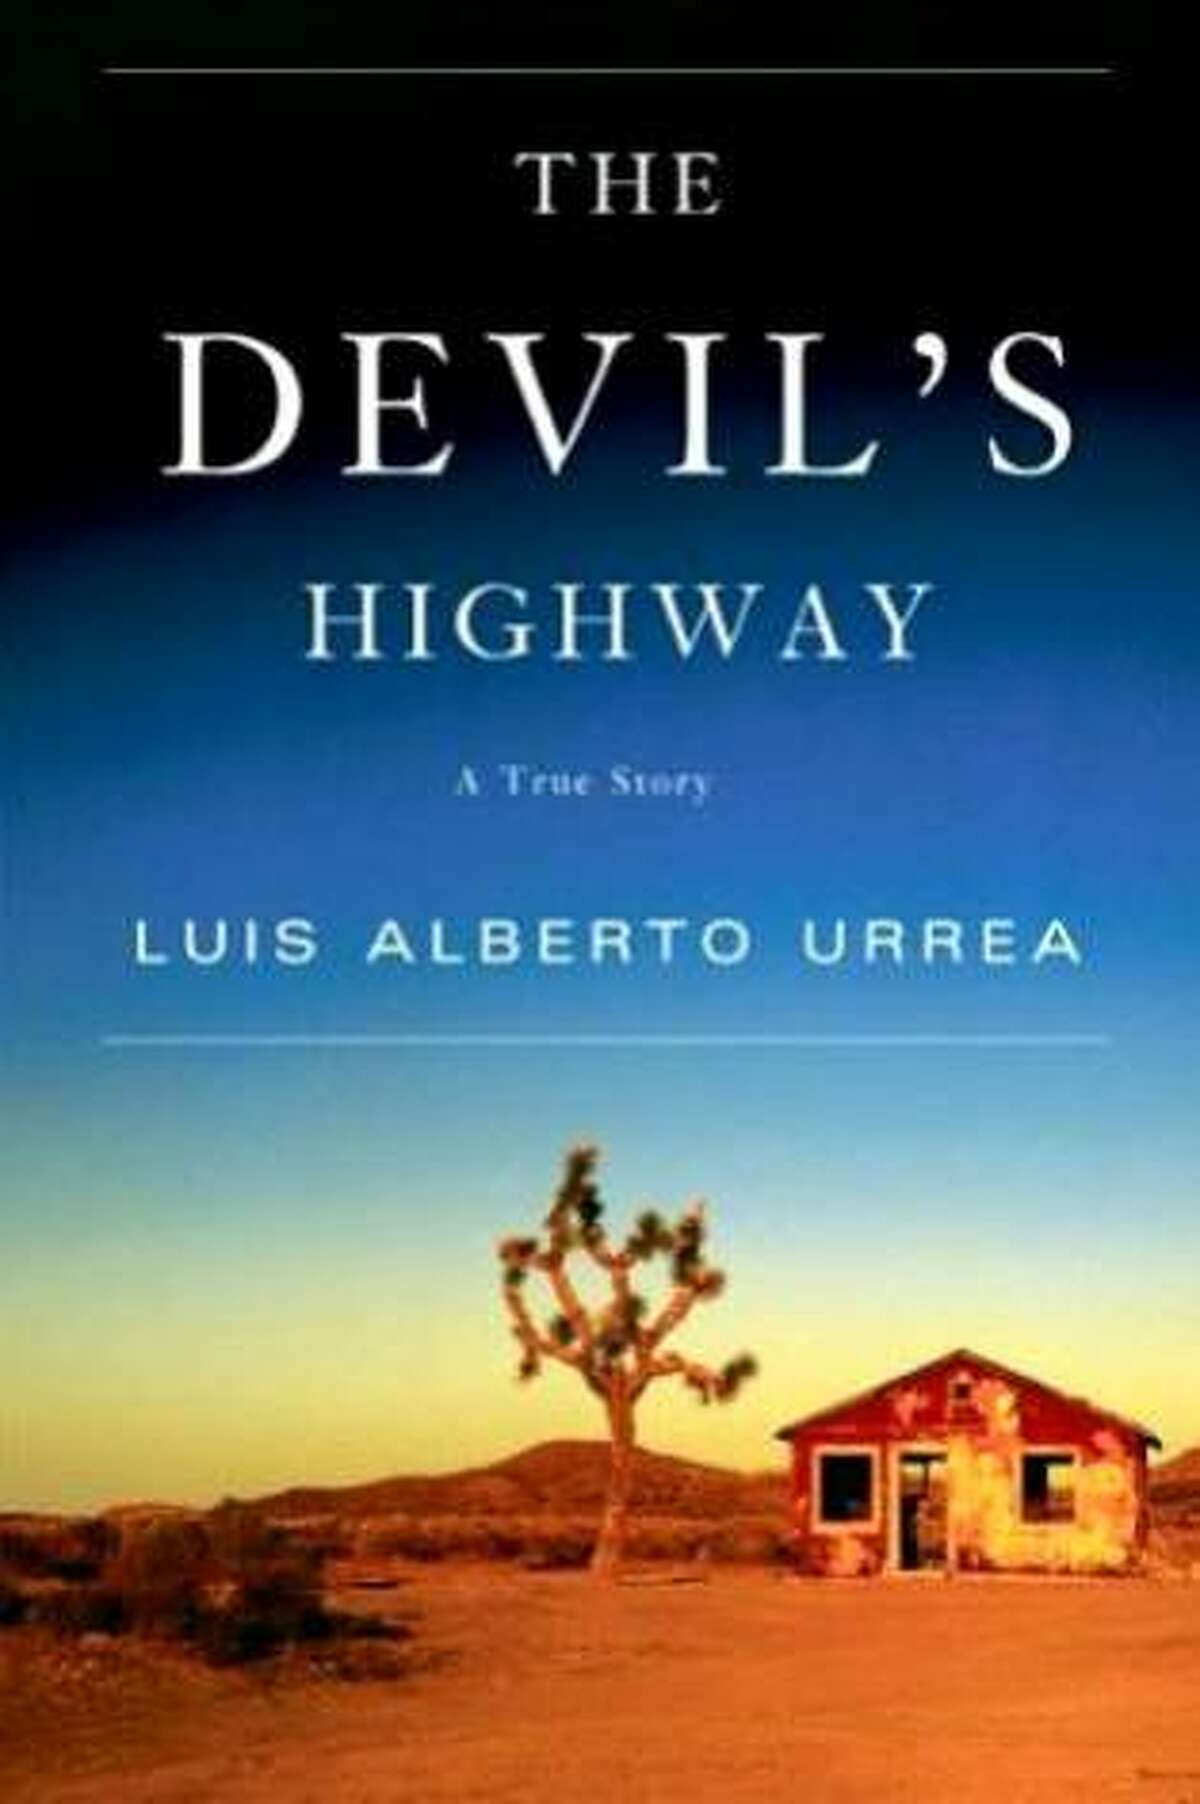 Luis Alberto Urrea's "The Devil's Highway: A True Story" recounts the horrific tale of 26 Mexicans trying to cross the Arizona desert in 2001.